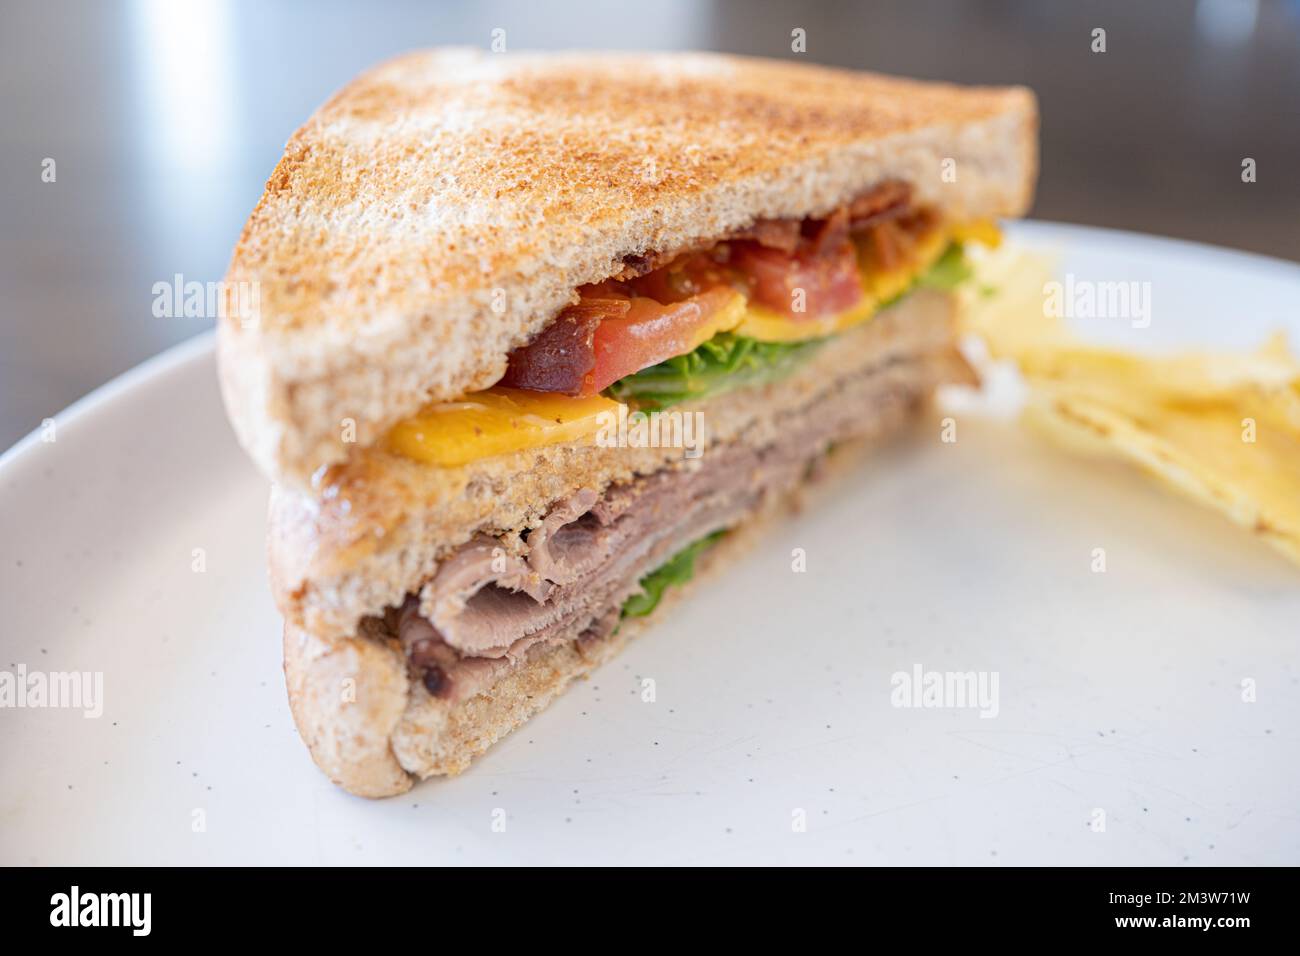 Toasted Texas Club Sandwitch ready to eat with crisps Stock Photo